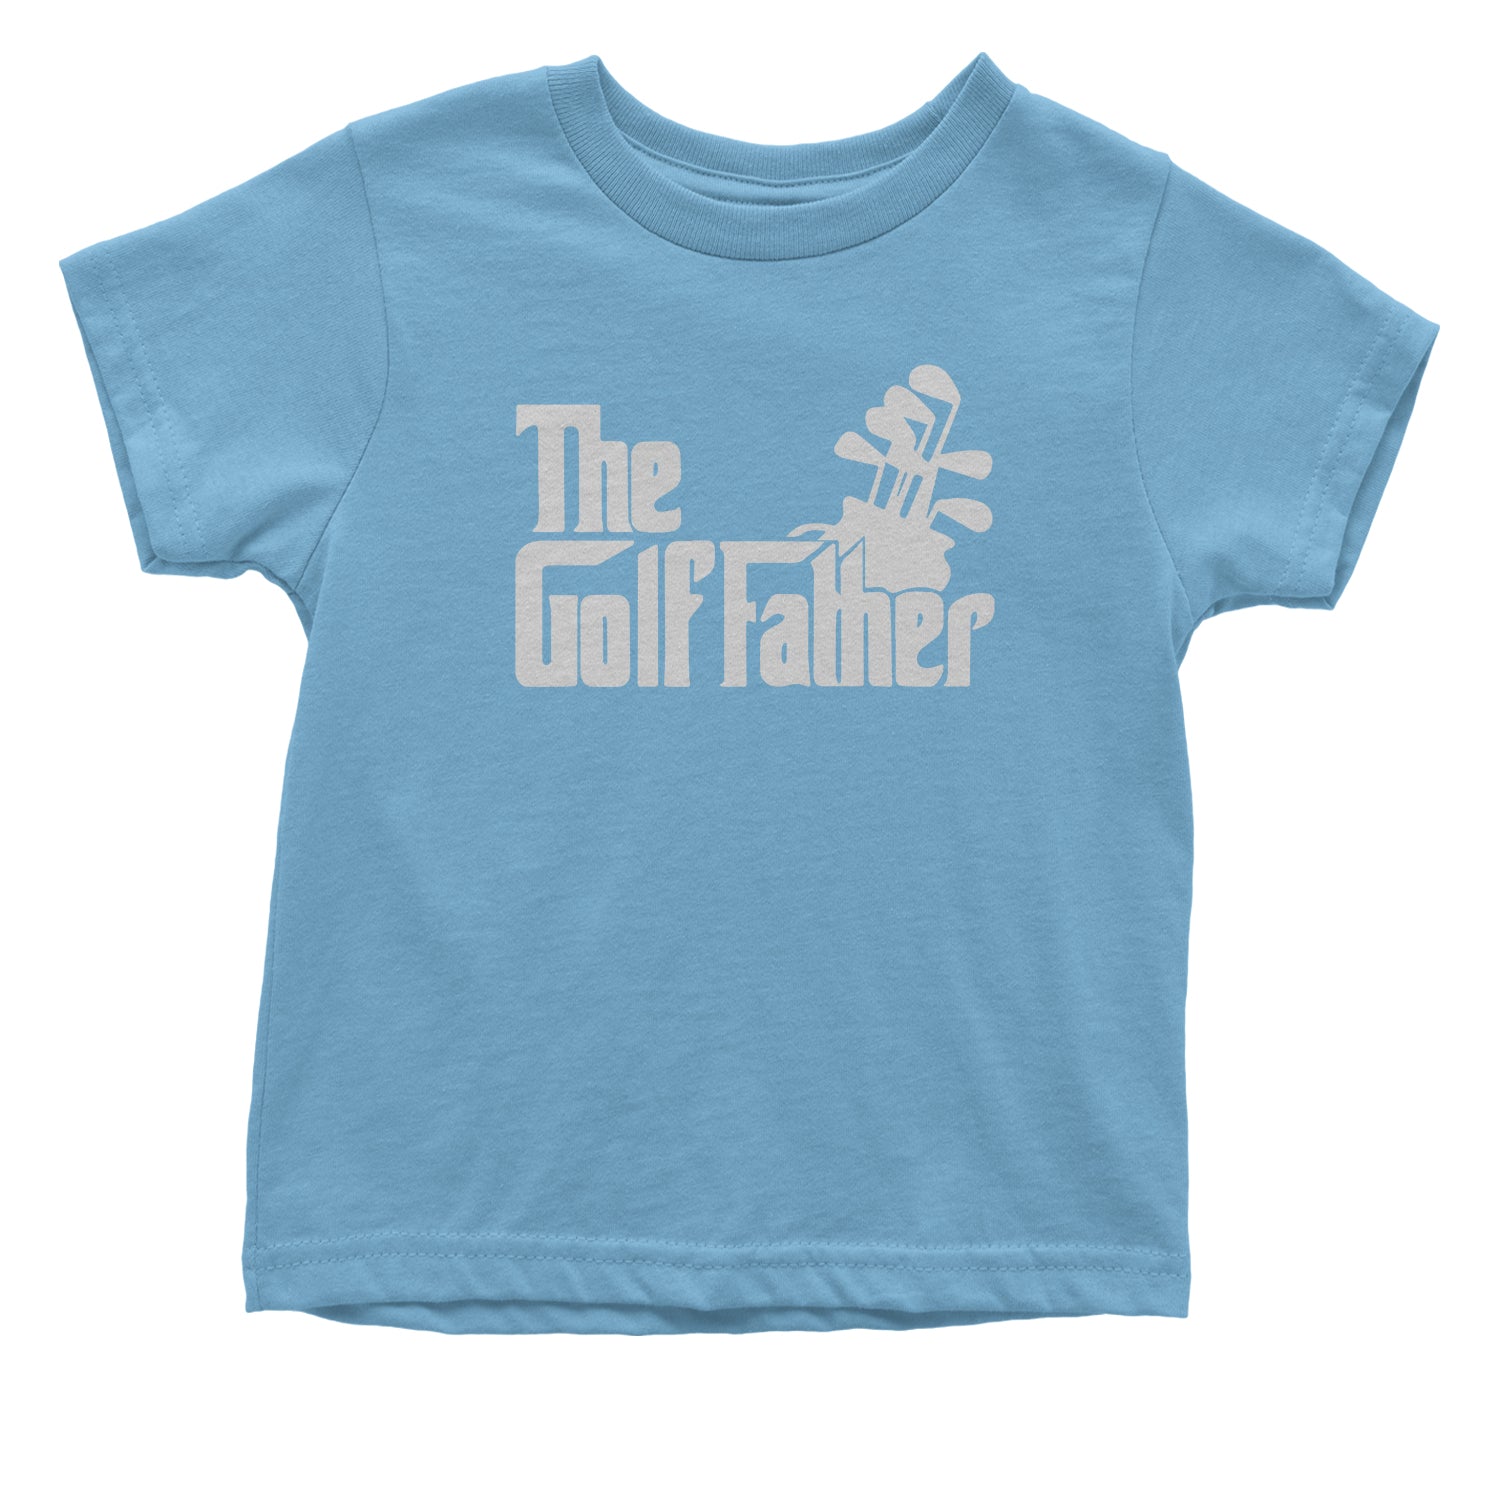 The Golf Father Golfing Dad Infant One-Piece Romper Bodysuit and Toddler T-shirt #expressiontees by Expression Tees